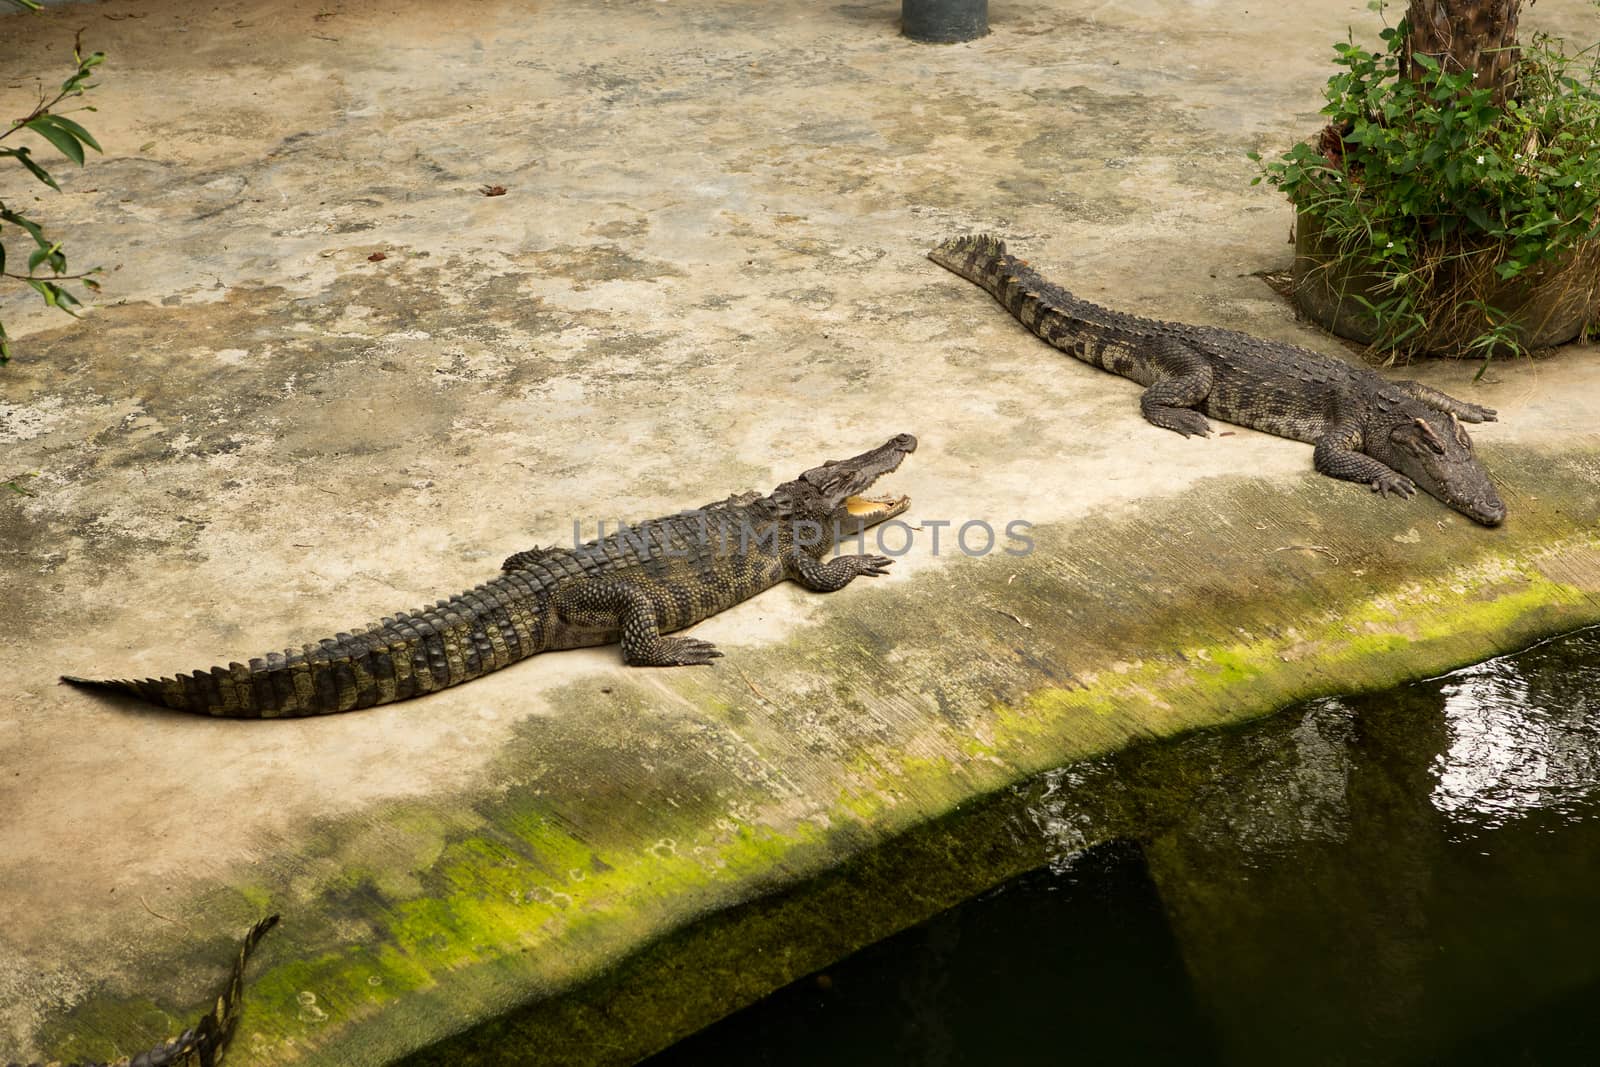 The Thailand crocodile farm and zoo in Patong